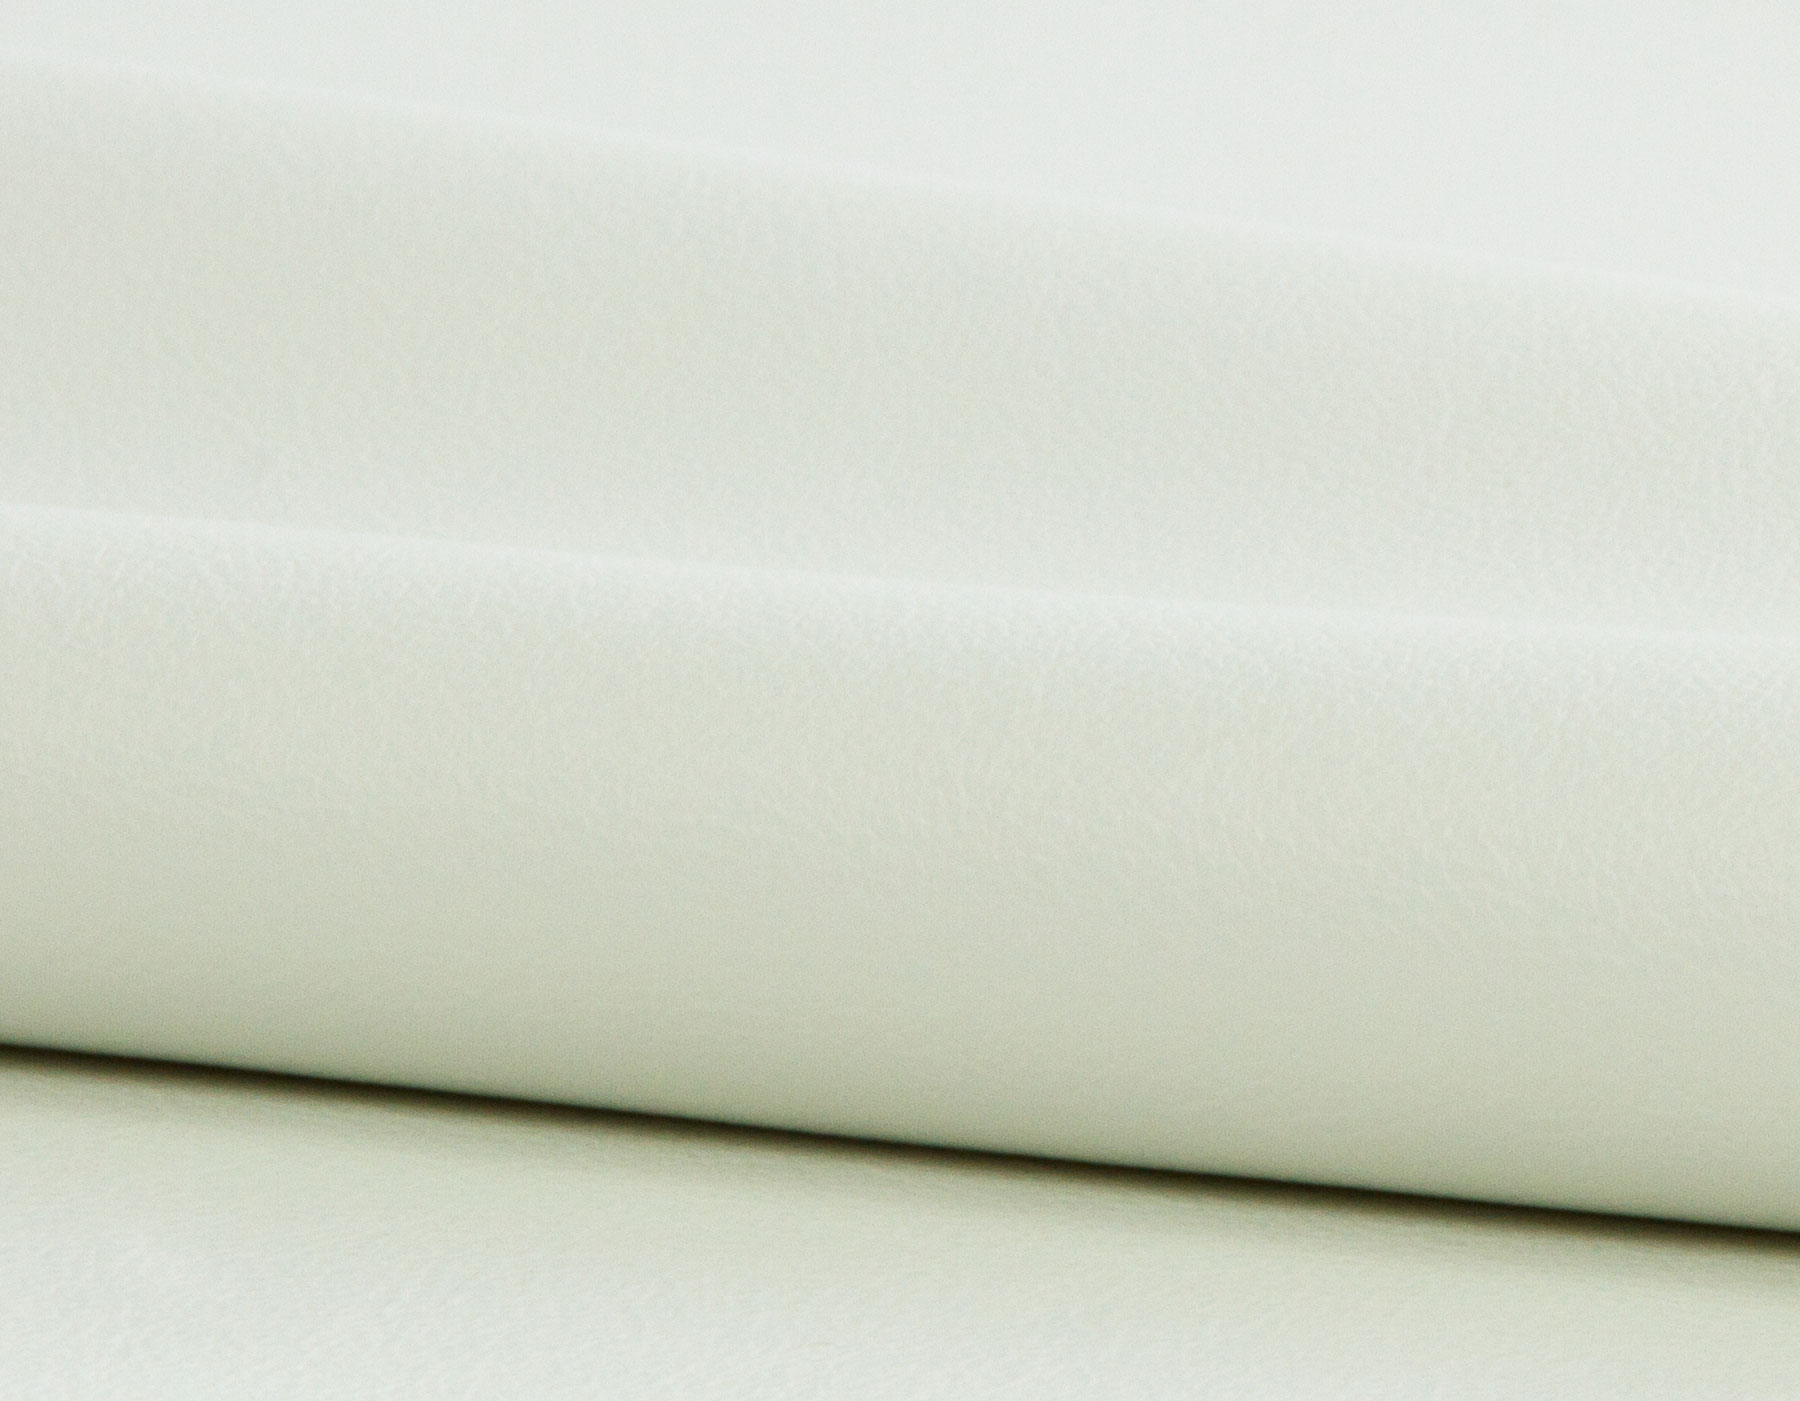 Genuine Leather Upholstery Fabric, White Leather Material